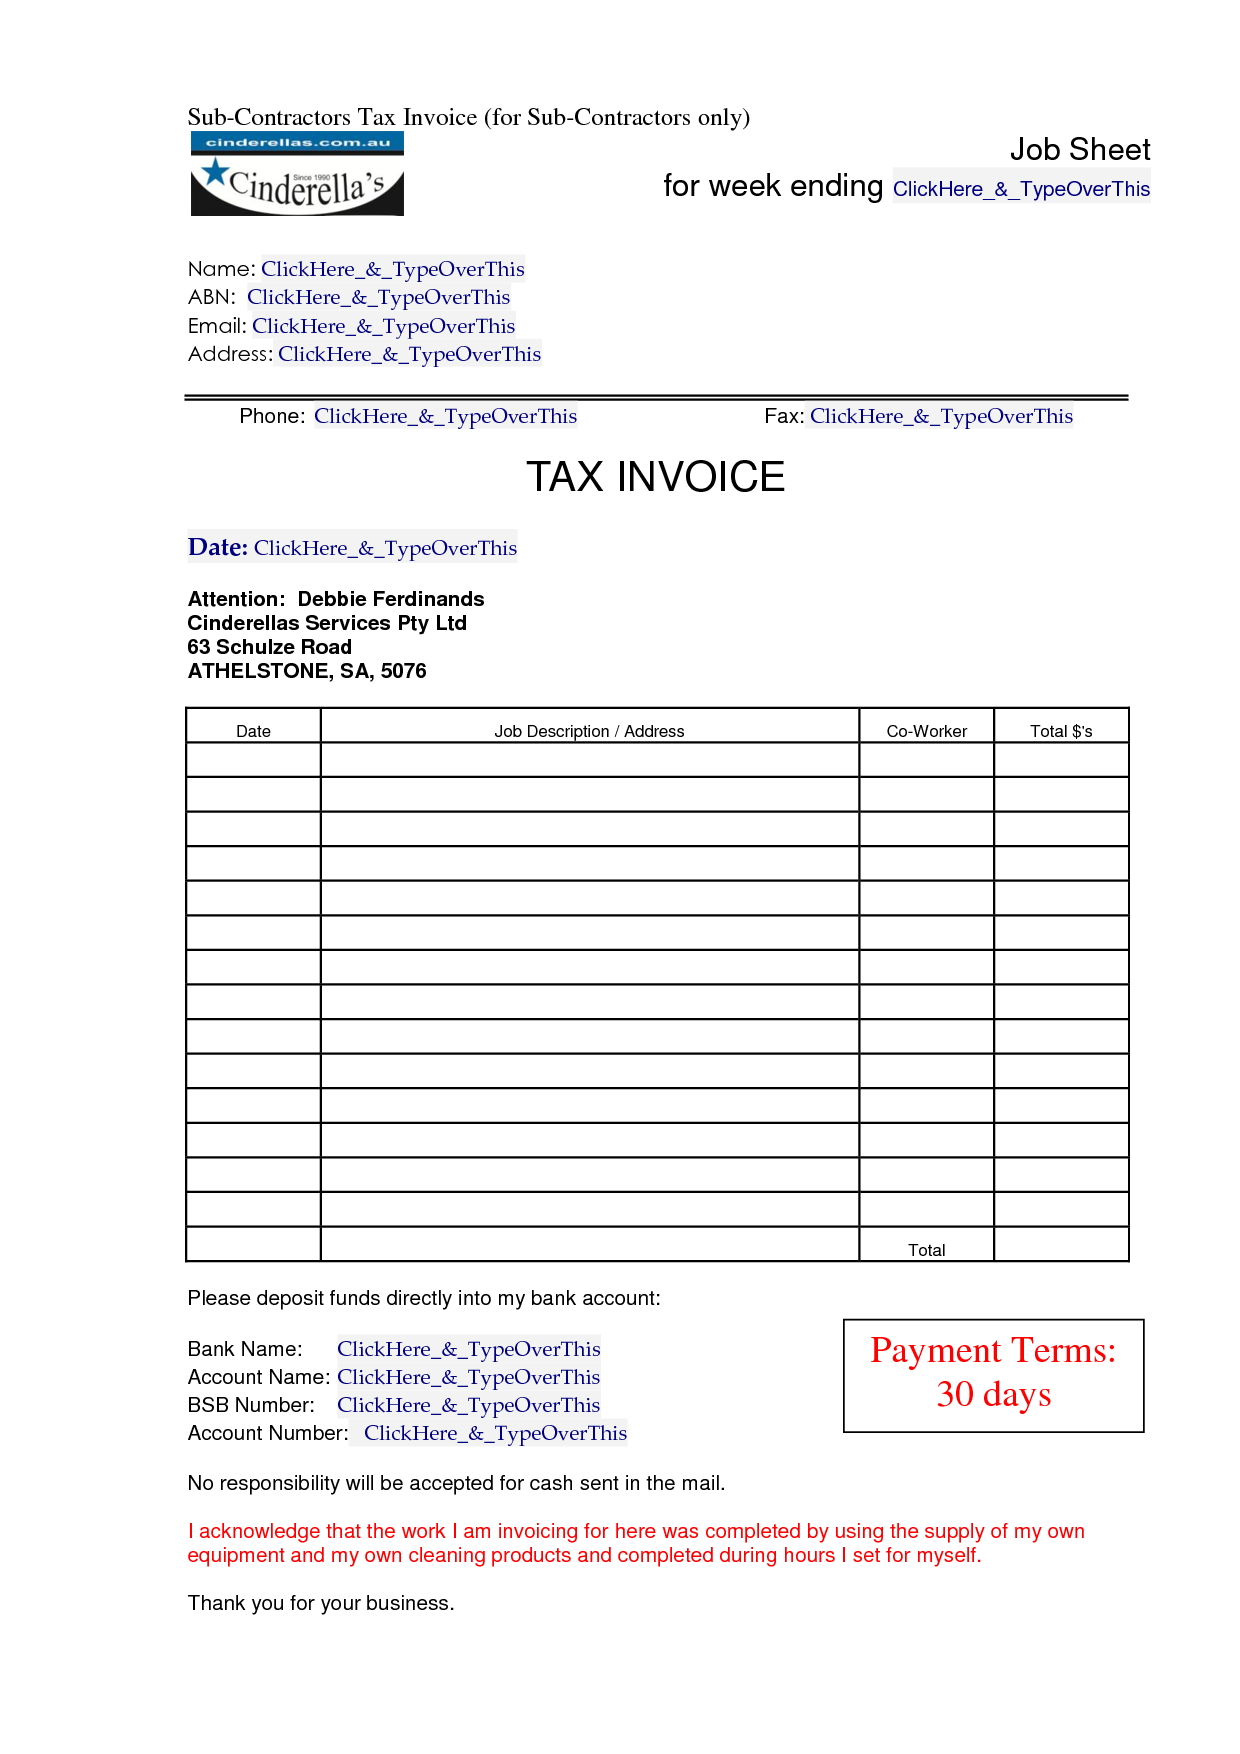 Issuing tax invoices | Australian Taxation Office